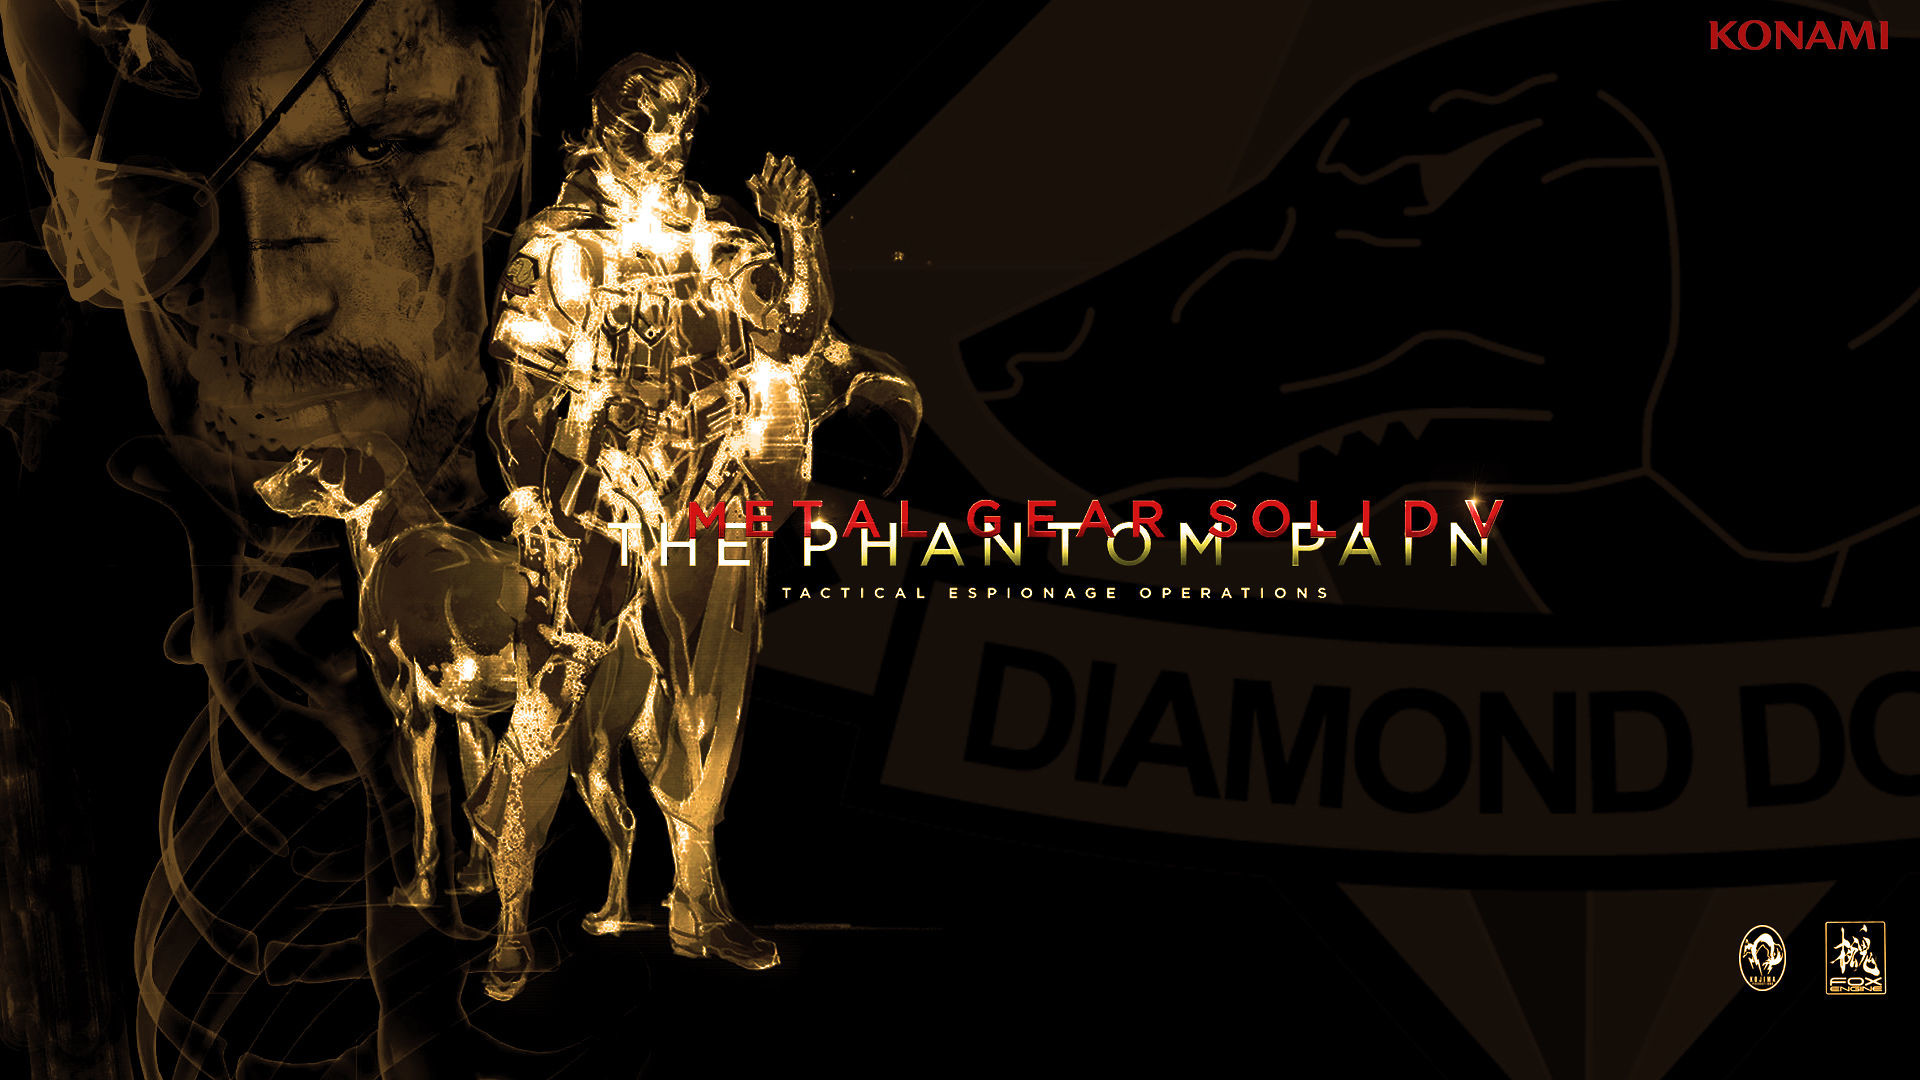 1920x1080 metal_gear_solid_5_wallpaper_by_snake_eater88-d69pin0-metal-gear-solid .